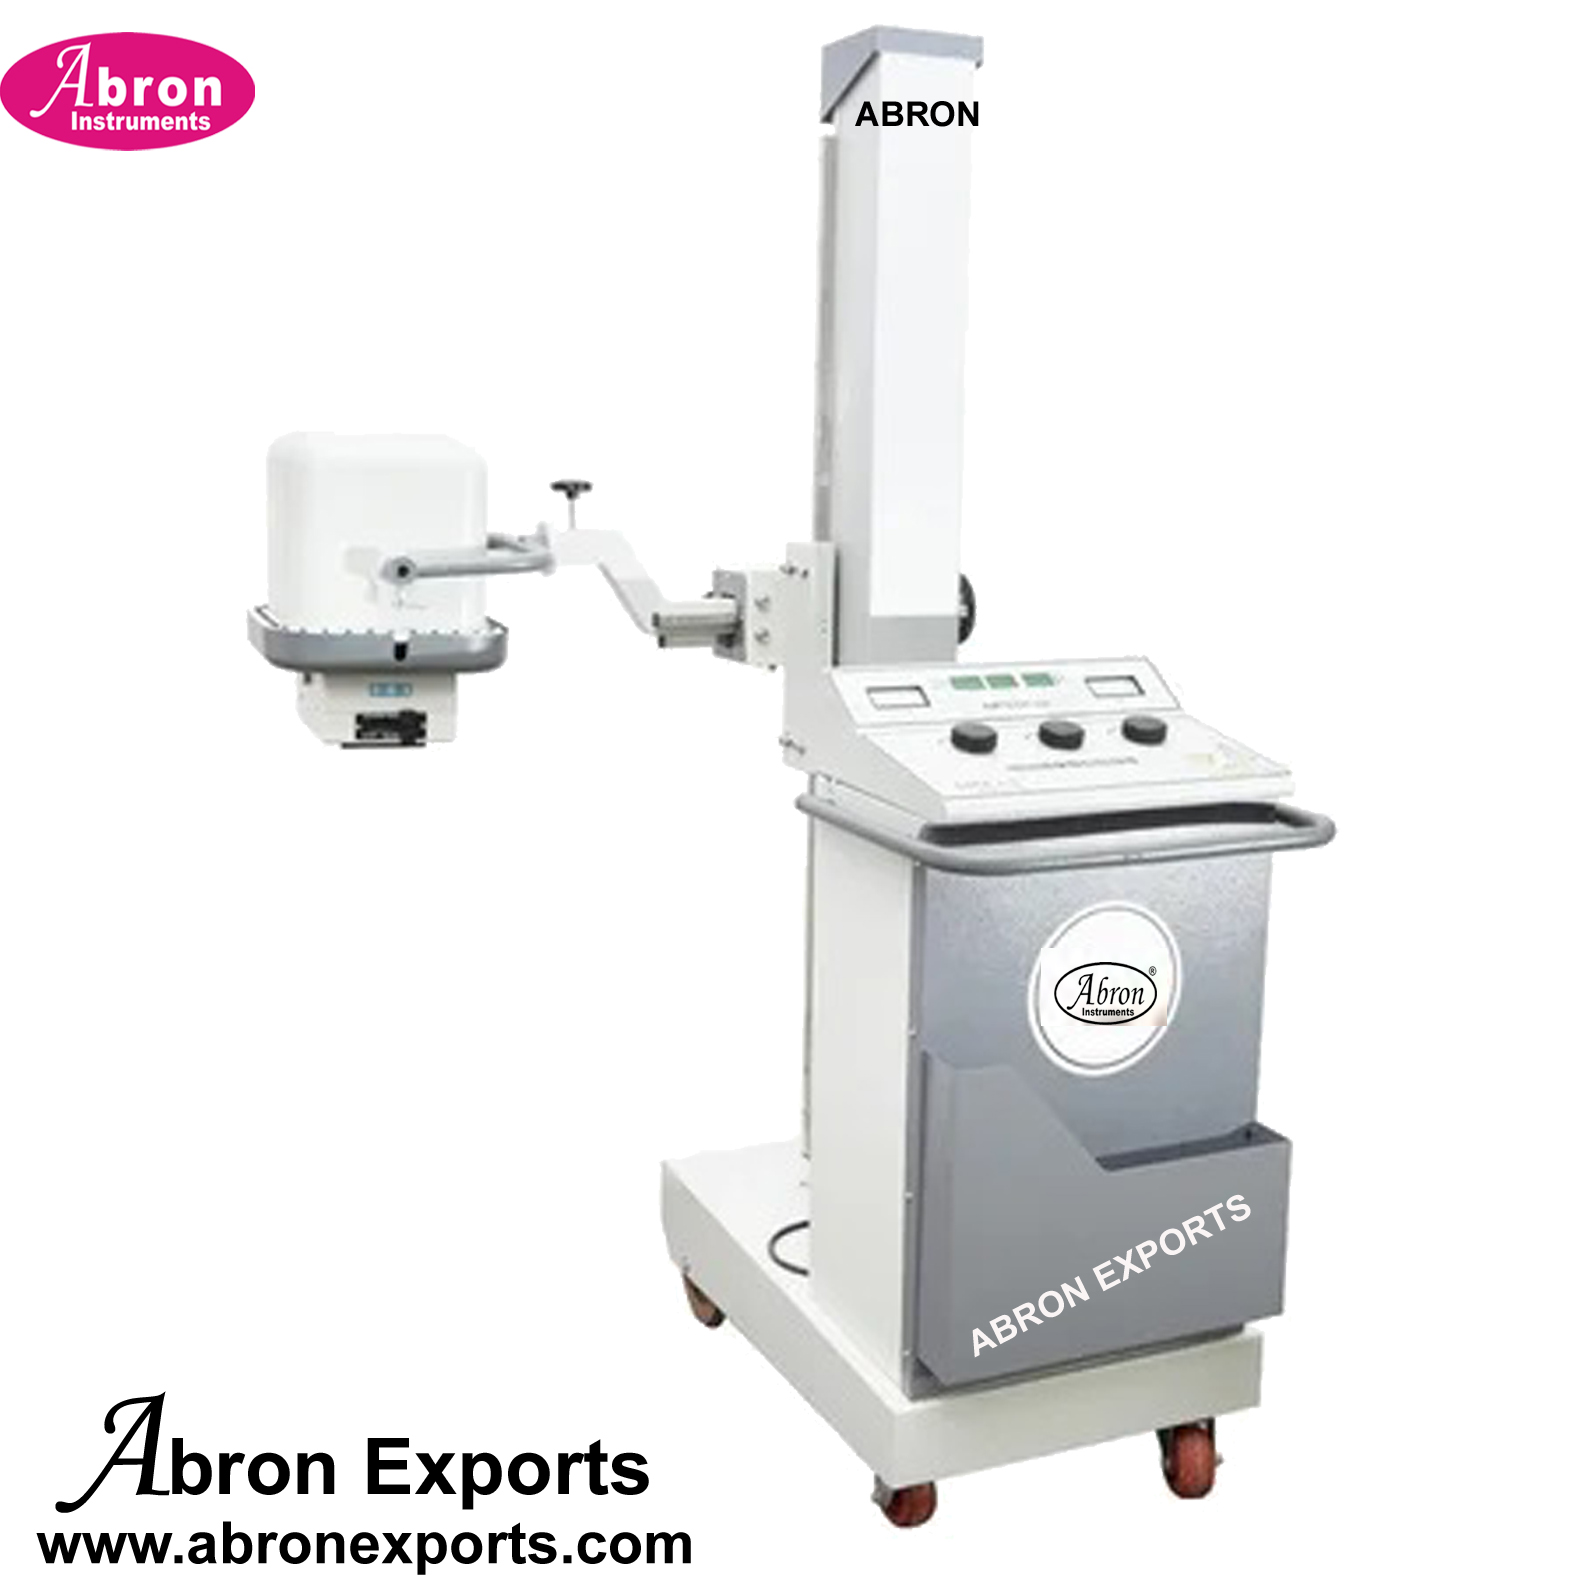 Ortho x-ray machine Mobile 80mA Portable with controller and stand setup Nursing Home Hospital Abron ABM-2782M80 